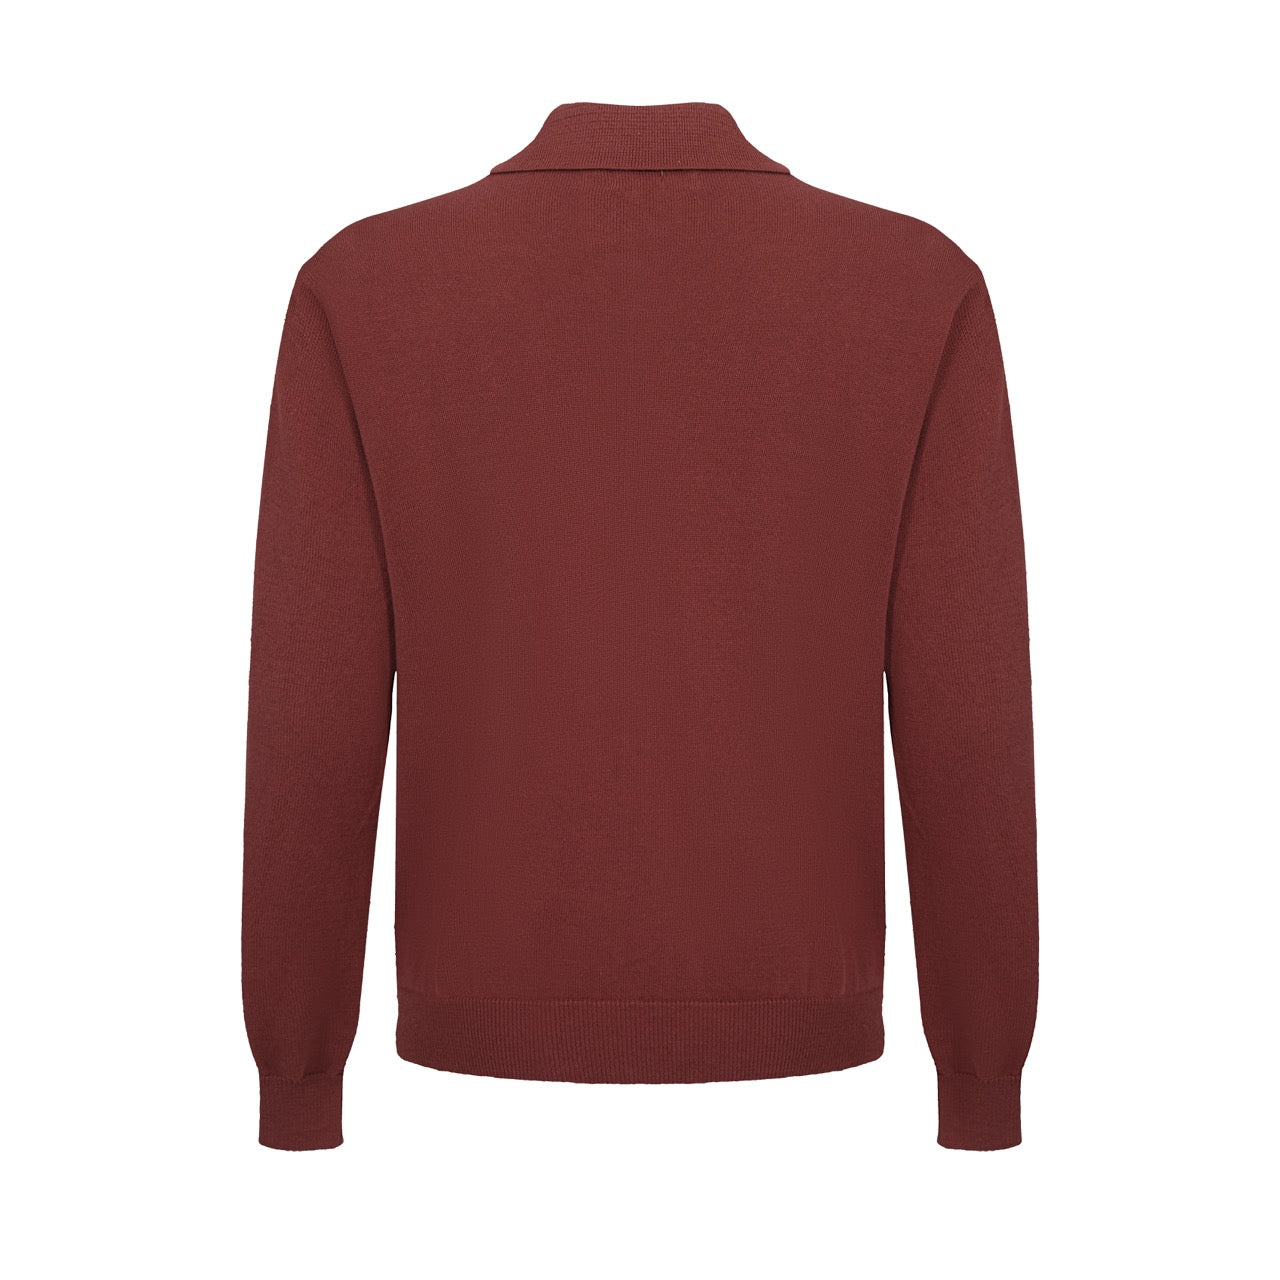 Men's Dark Brown Knitted Long Sleeves Polo